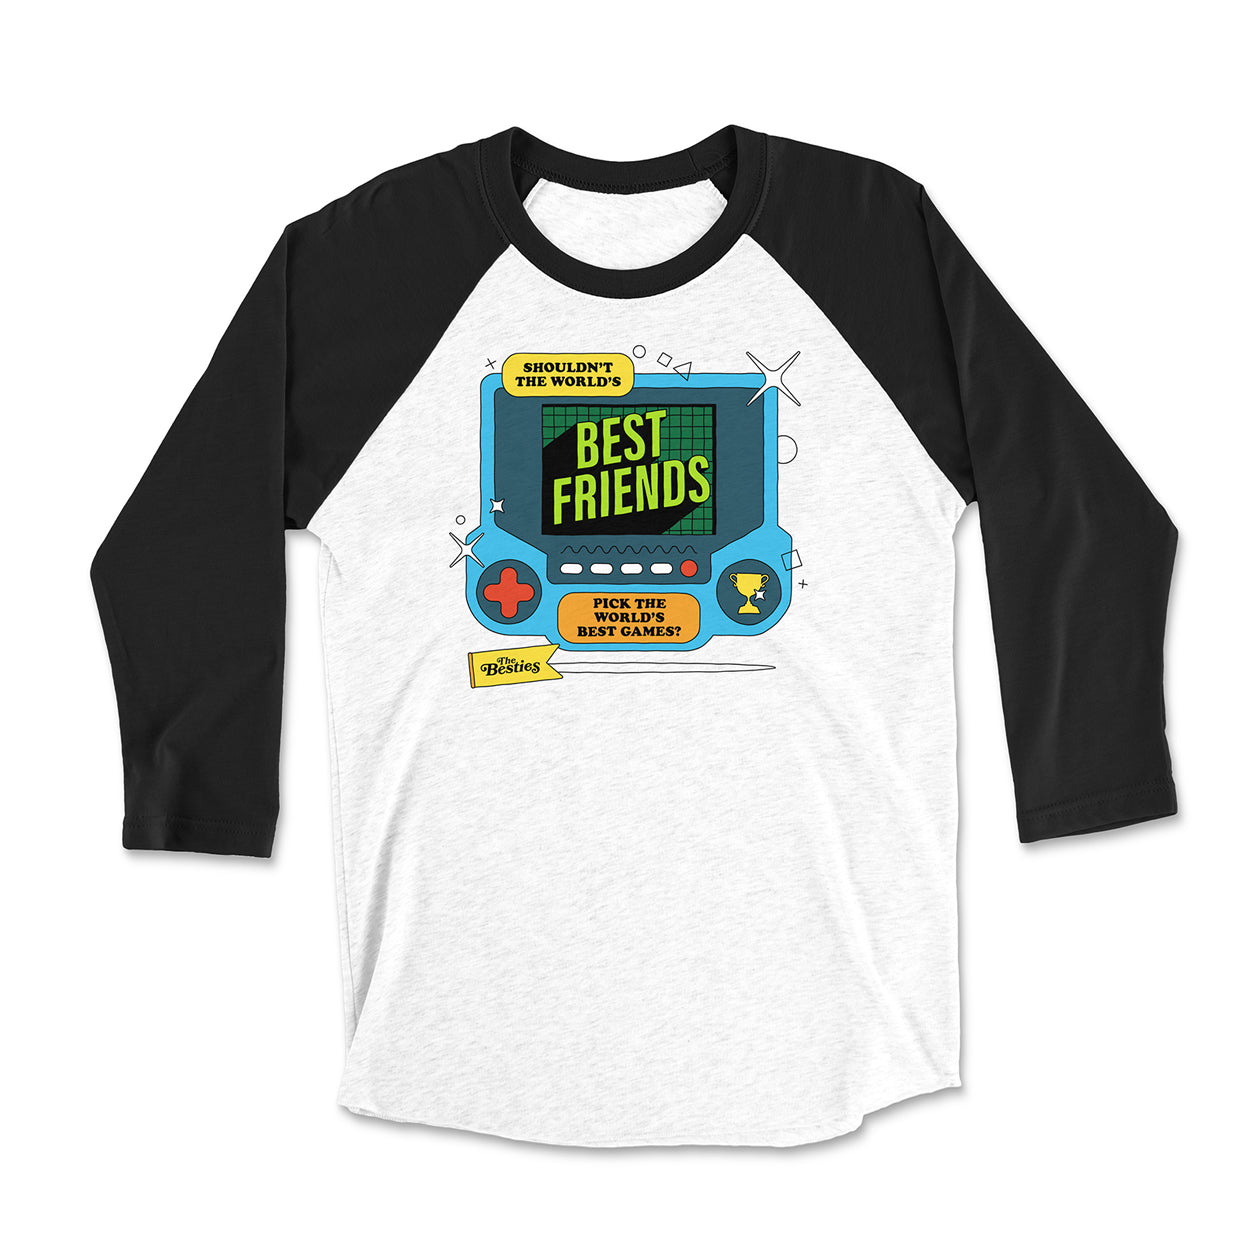 A raglan with black sleeves. The body has a graphic of a blue game system. It says, “Shouldn’t the world’s best friends pick the world’s best games?” There are circles, squares, and triangles around the game system. Below the game system is a yellow banner that says, “The Besties”.